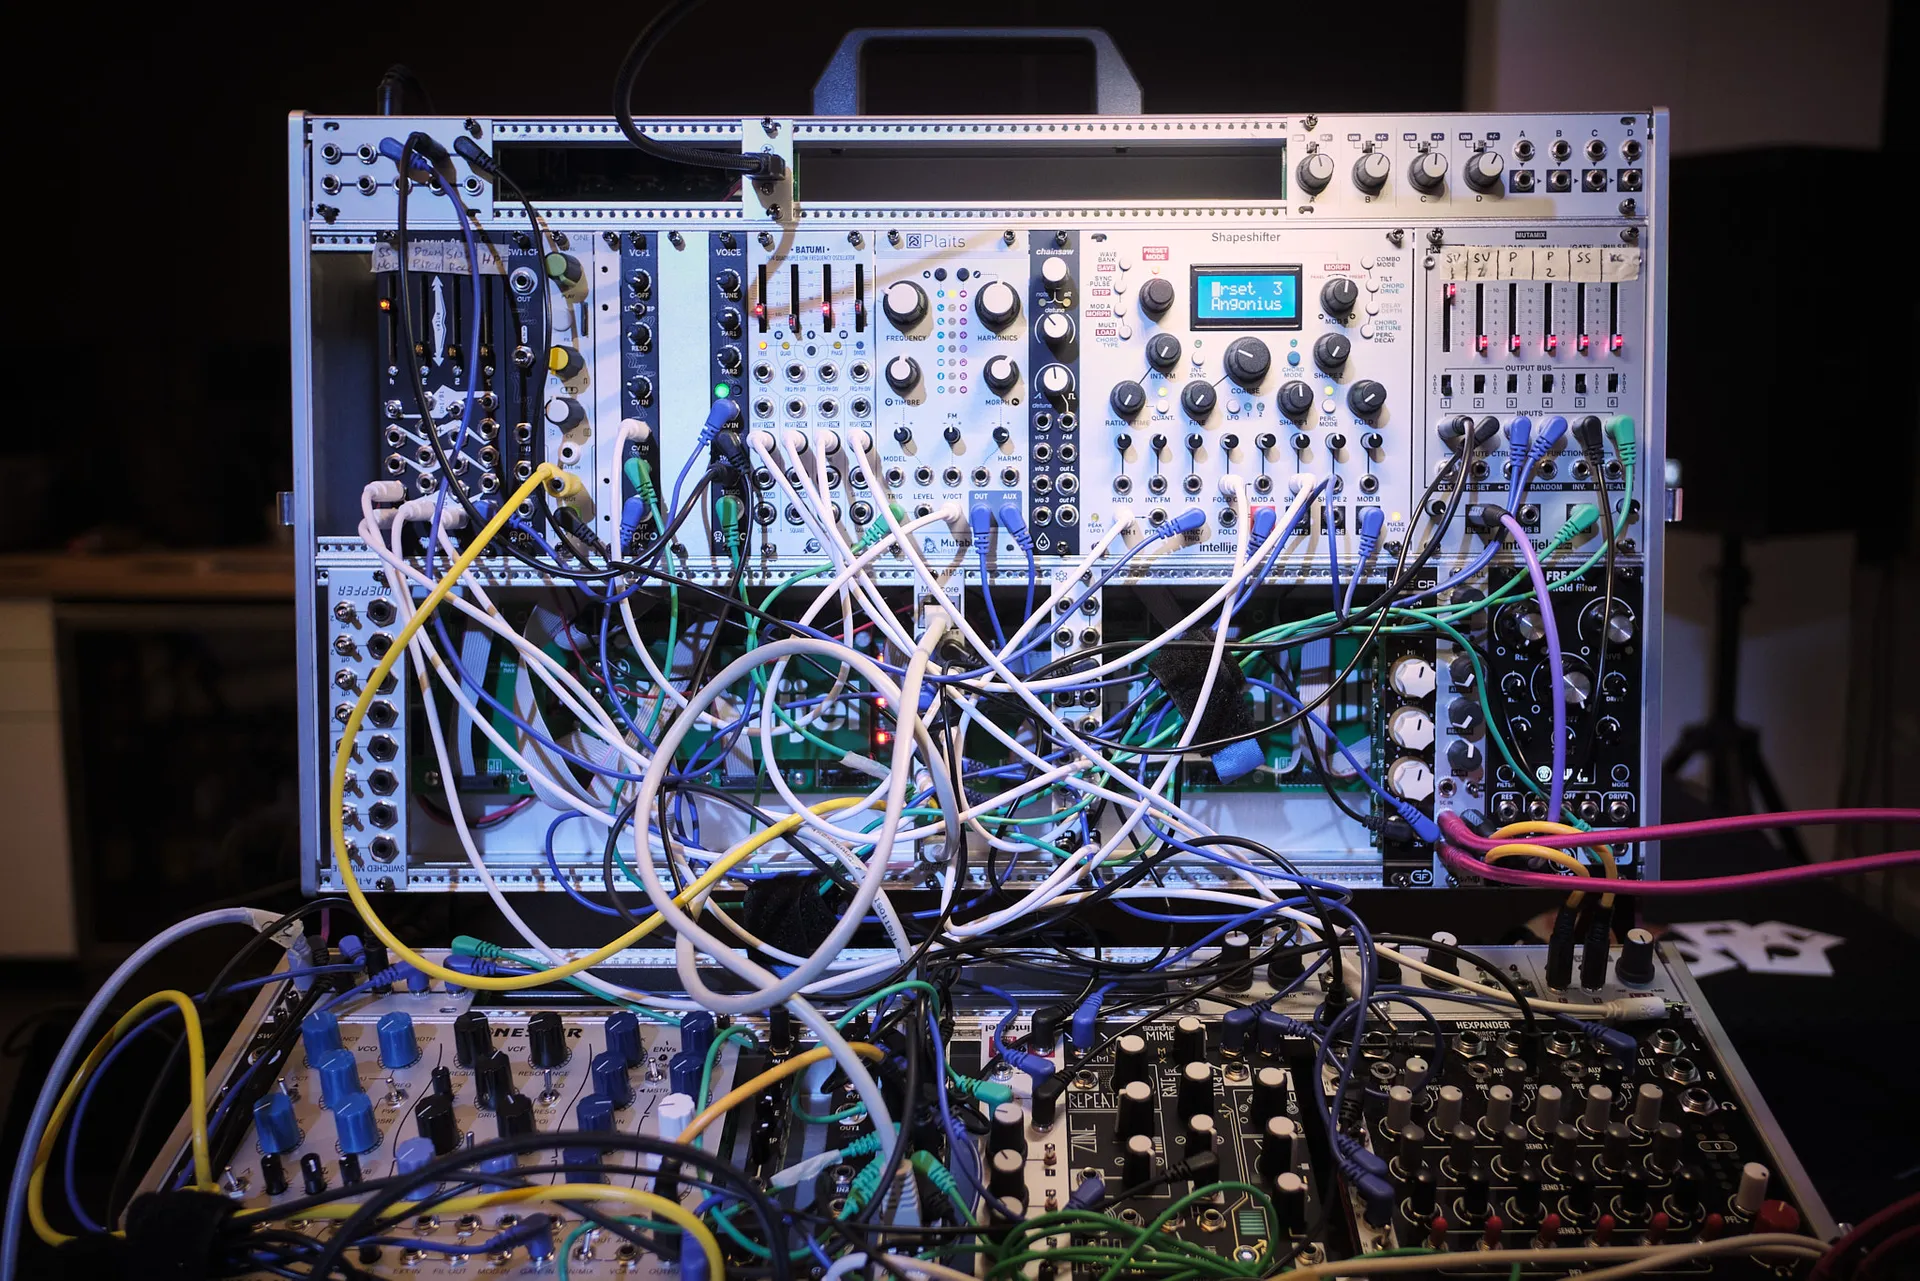 How to make techno music on a modular synth